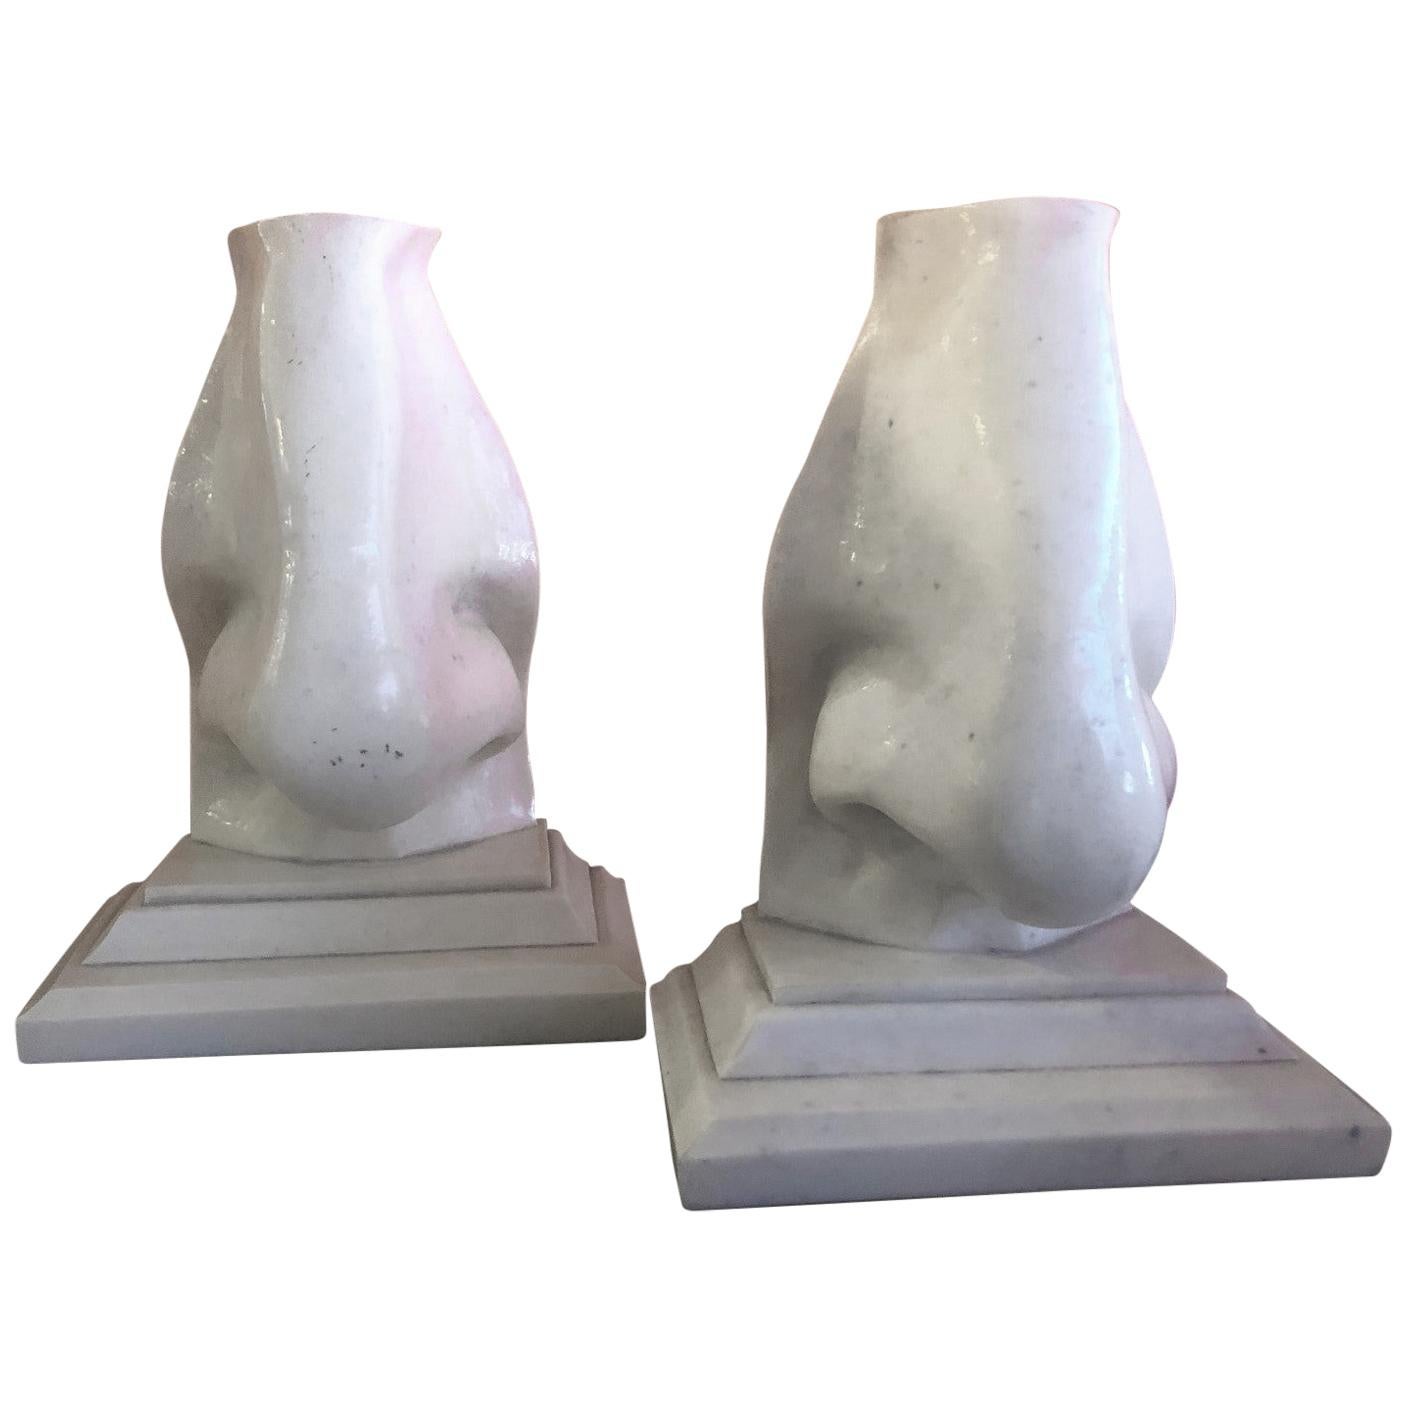 Pair of Faux Marble Pop Art "Nose" Bookends